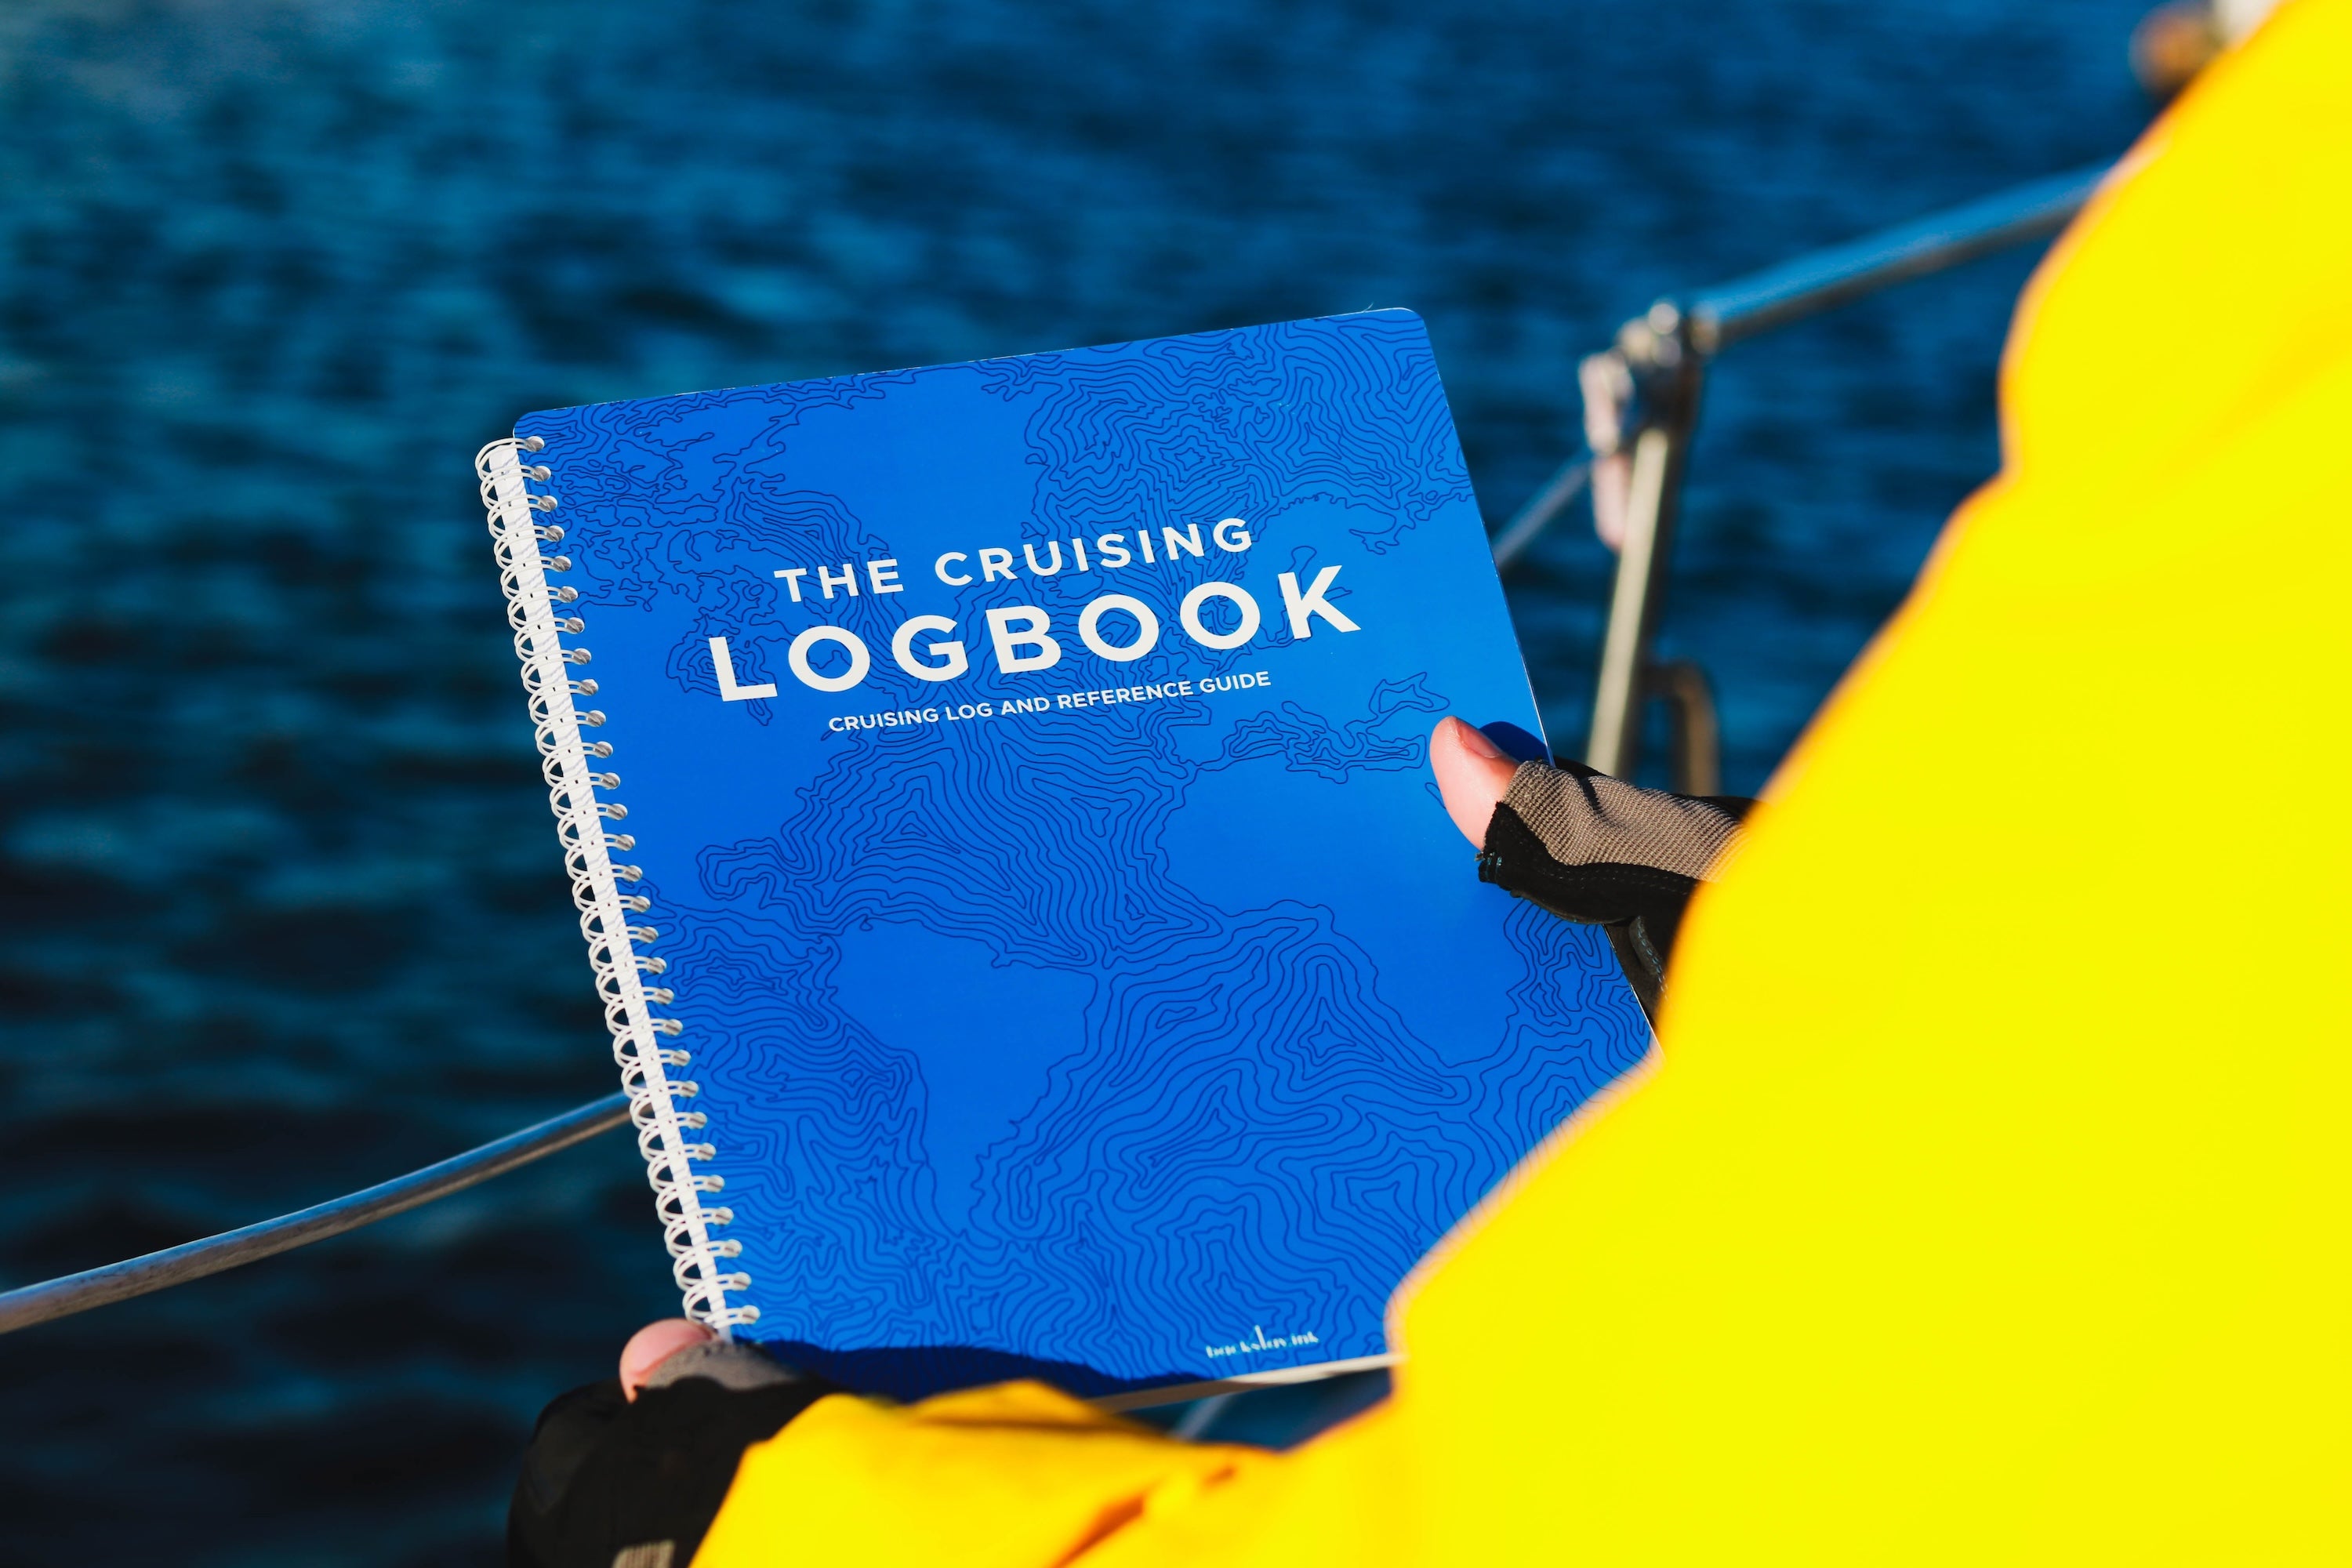 Photo: Cover of the cruising logbook